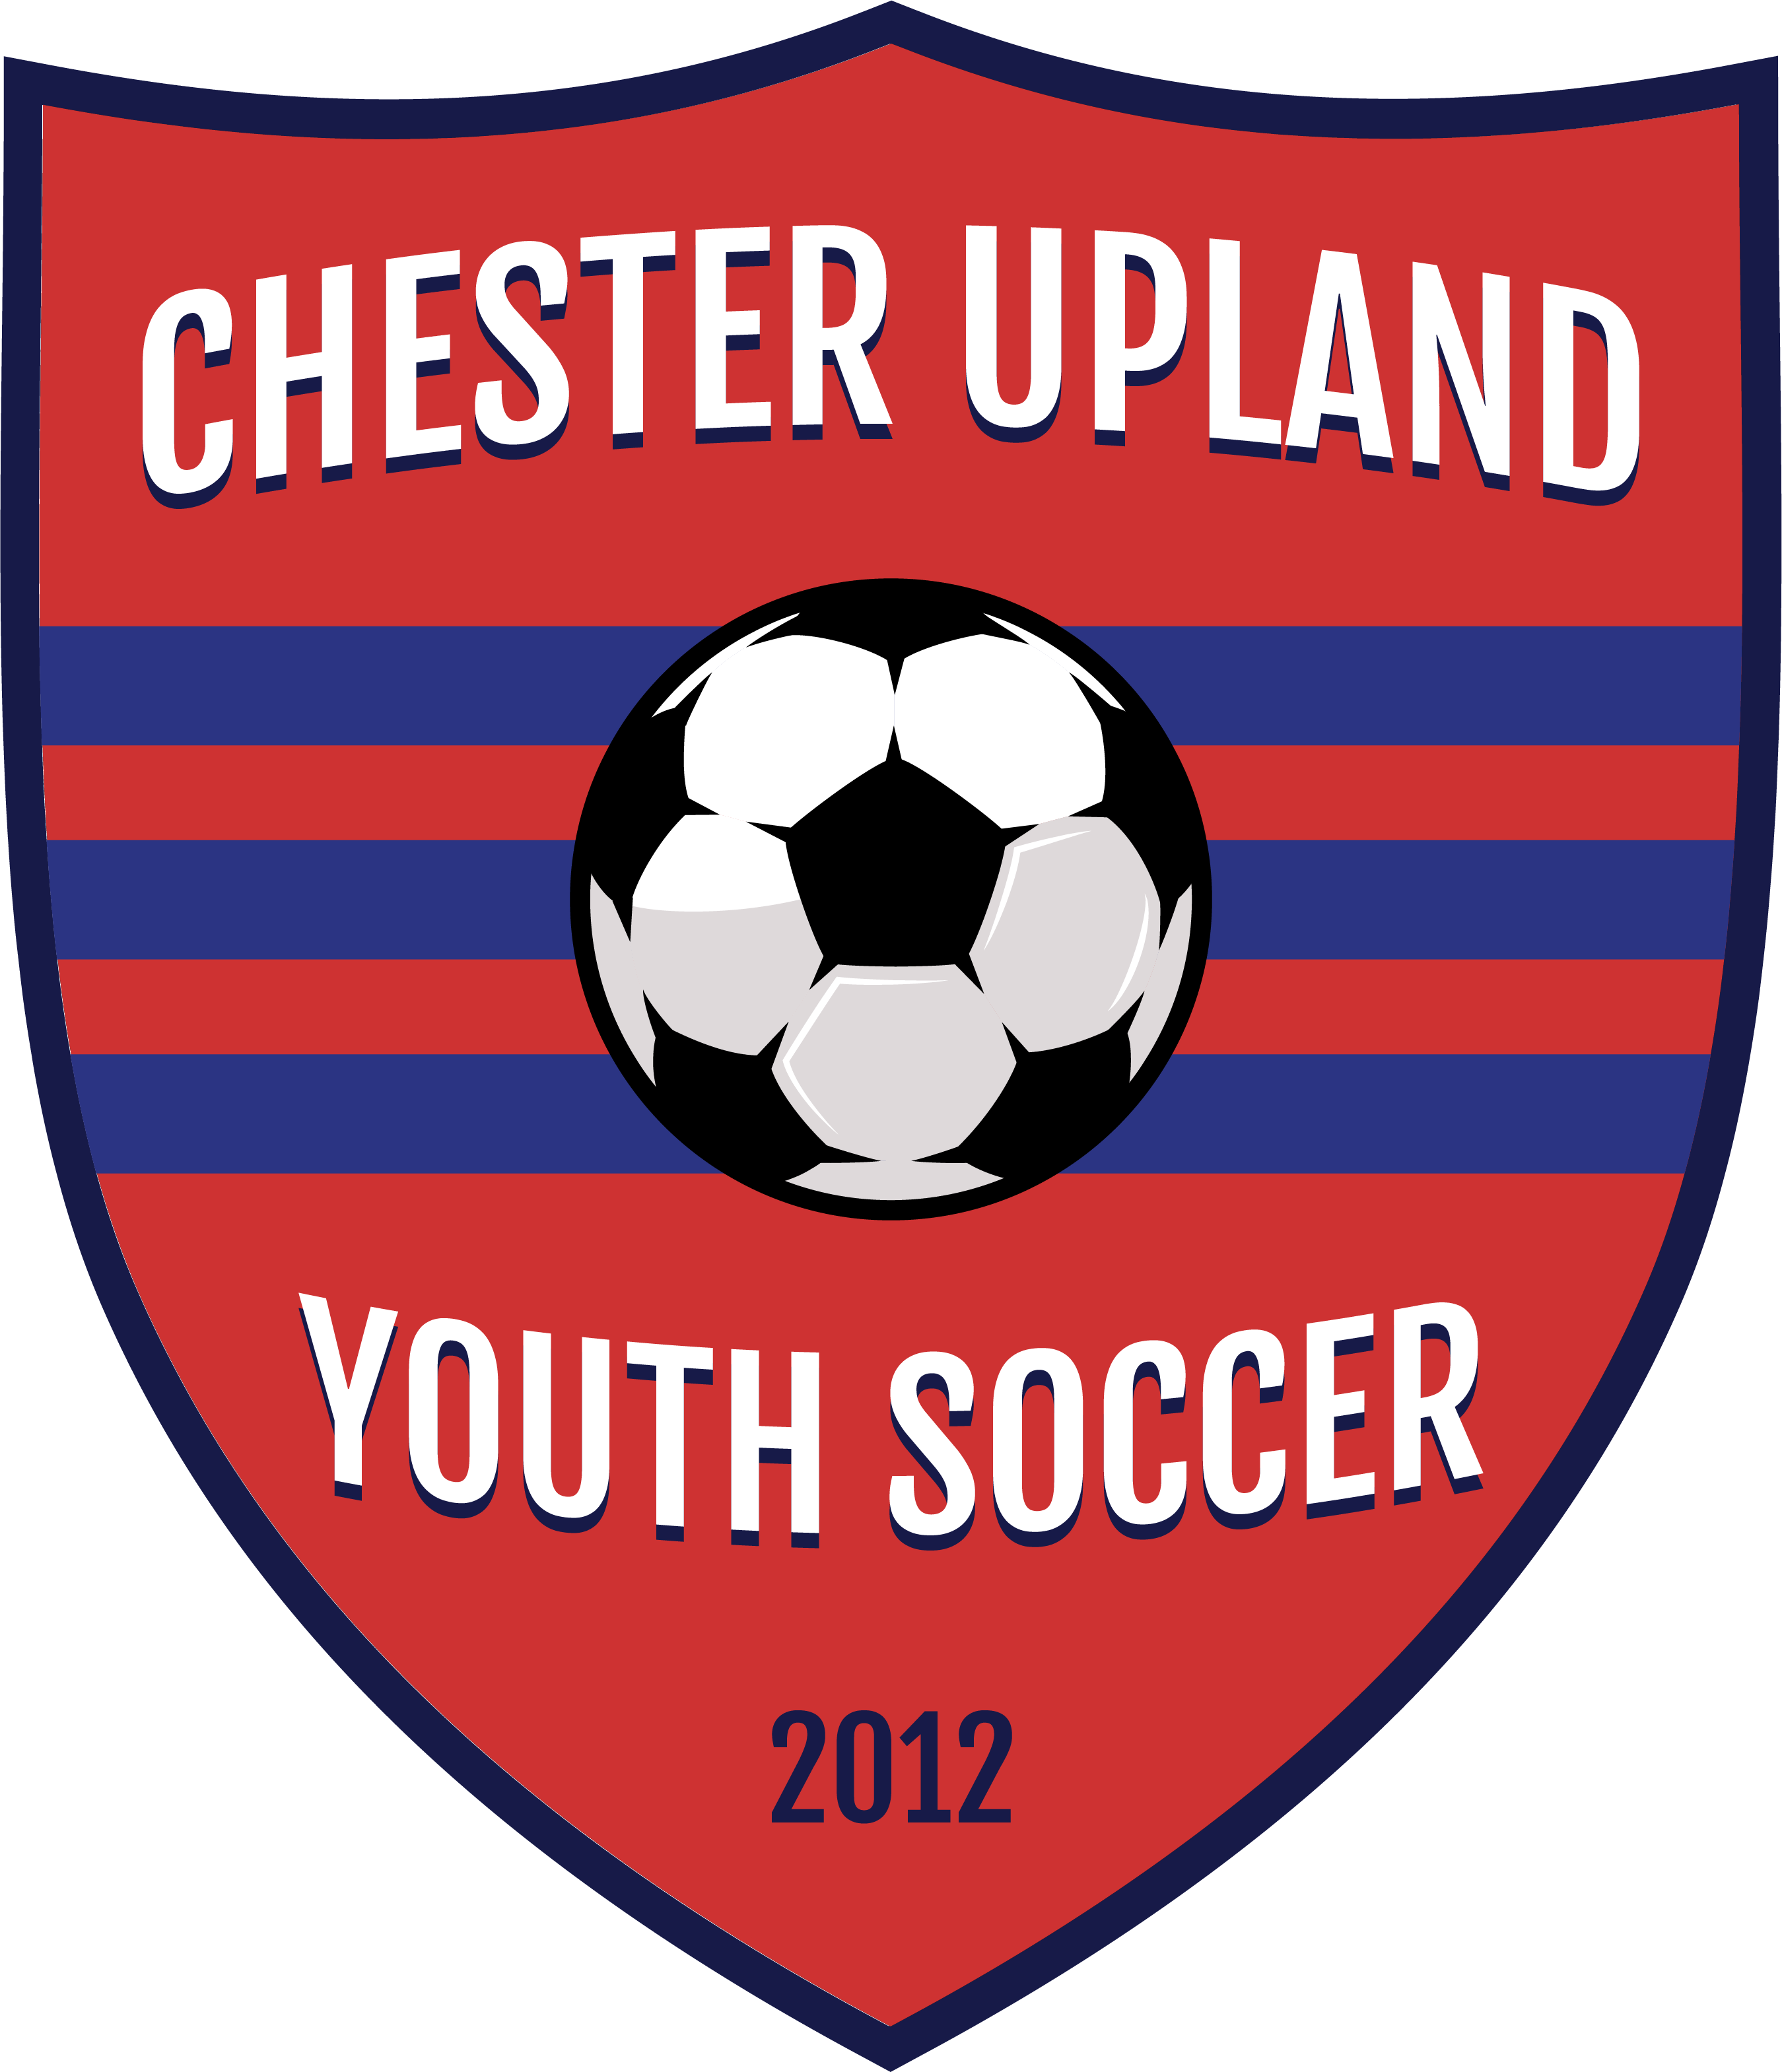 Chester Upland Youth Soccer logo